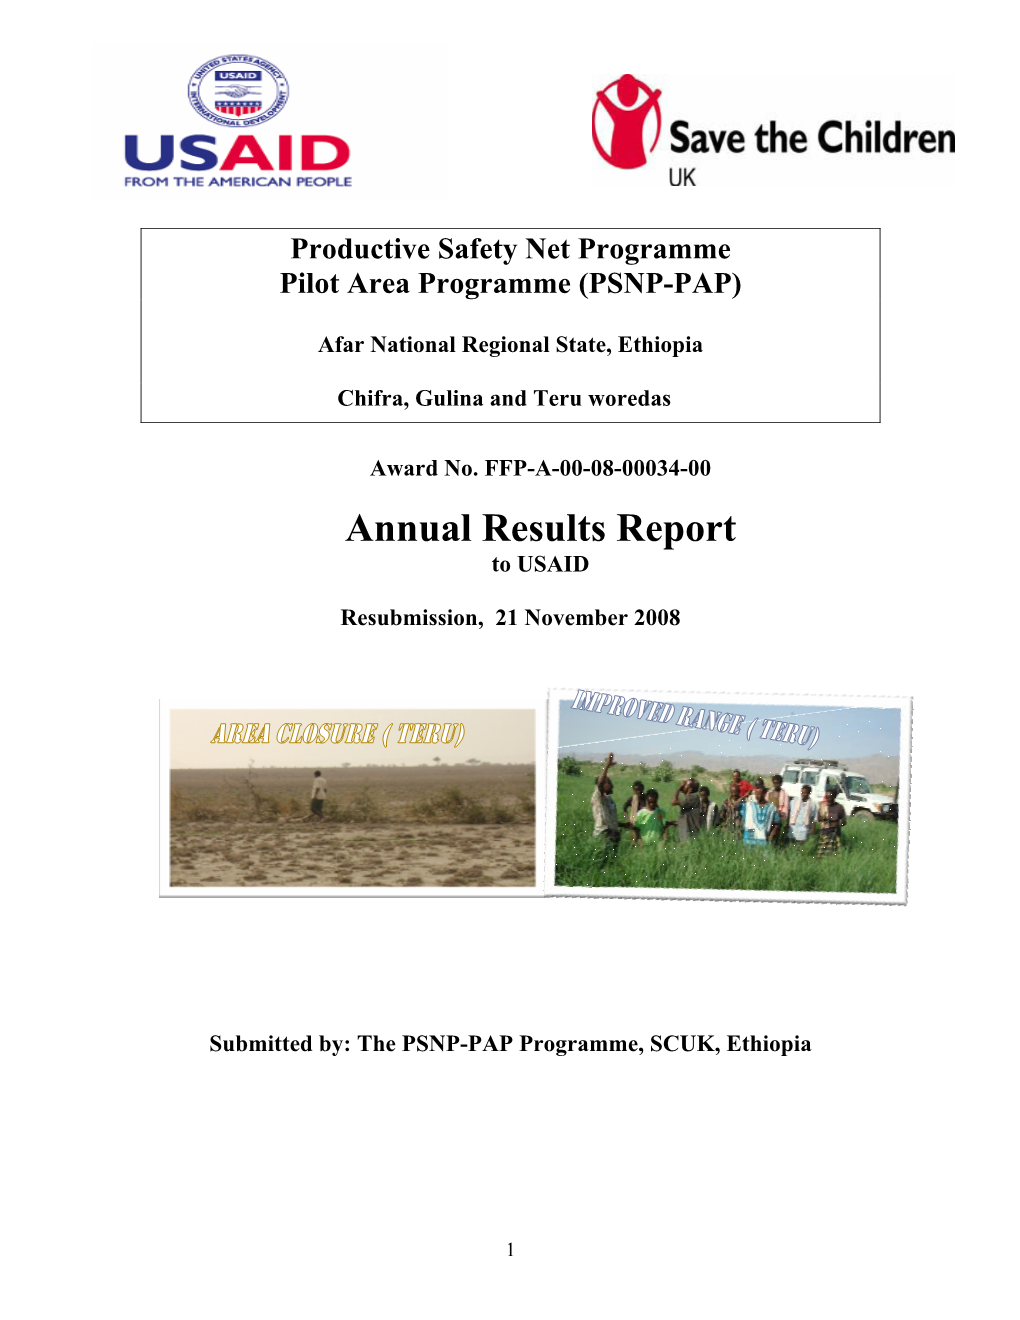 Annual Results Report to USAID